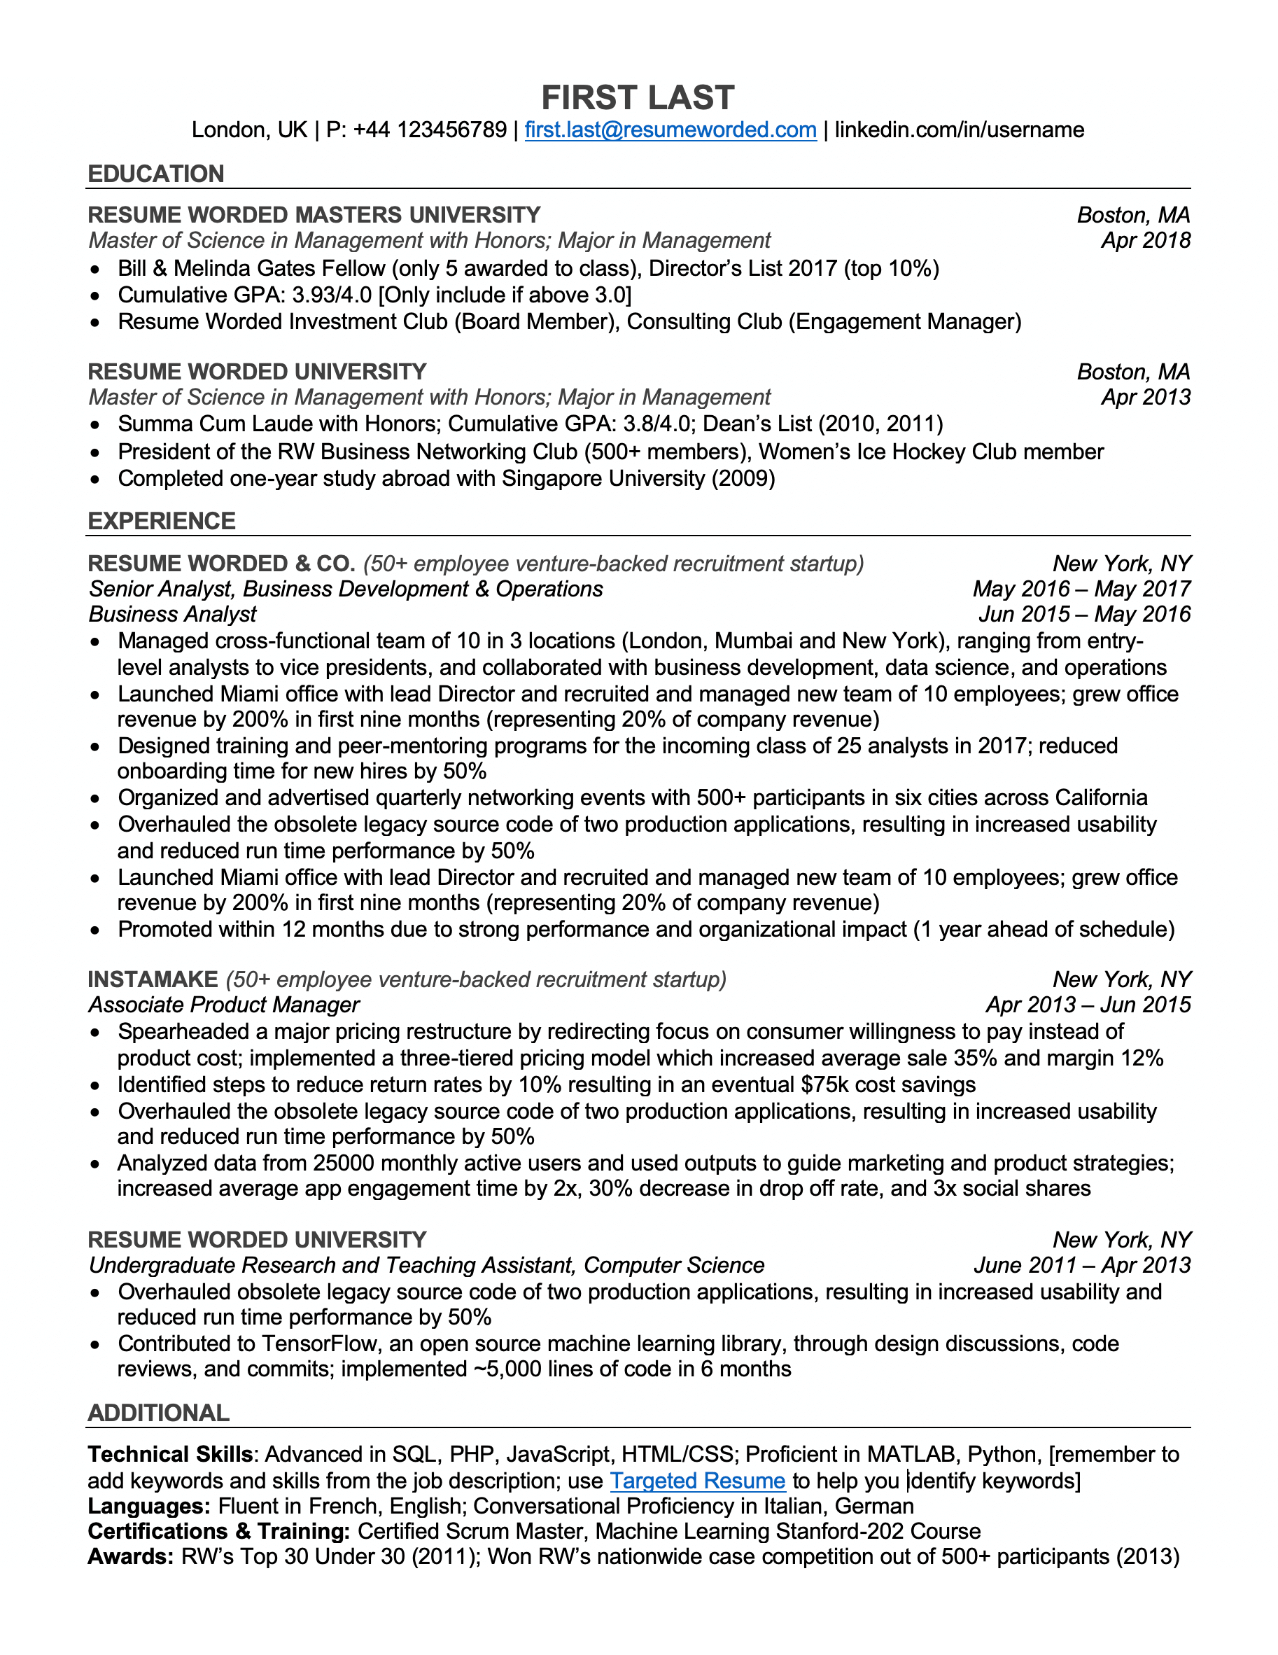 Professional ATS Resume Templates for Experienced Hires and College Students or Grads ...